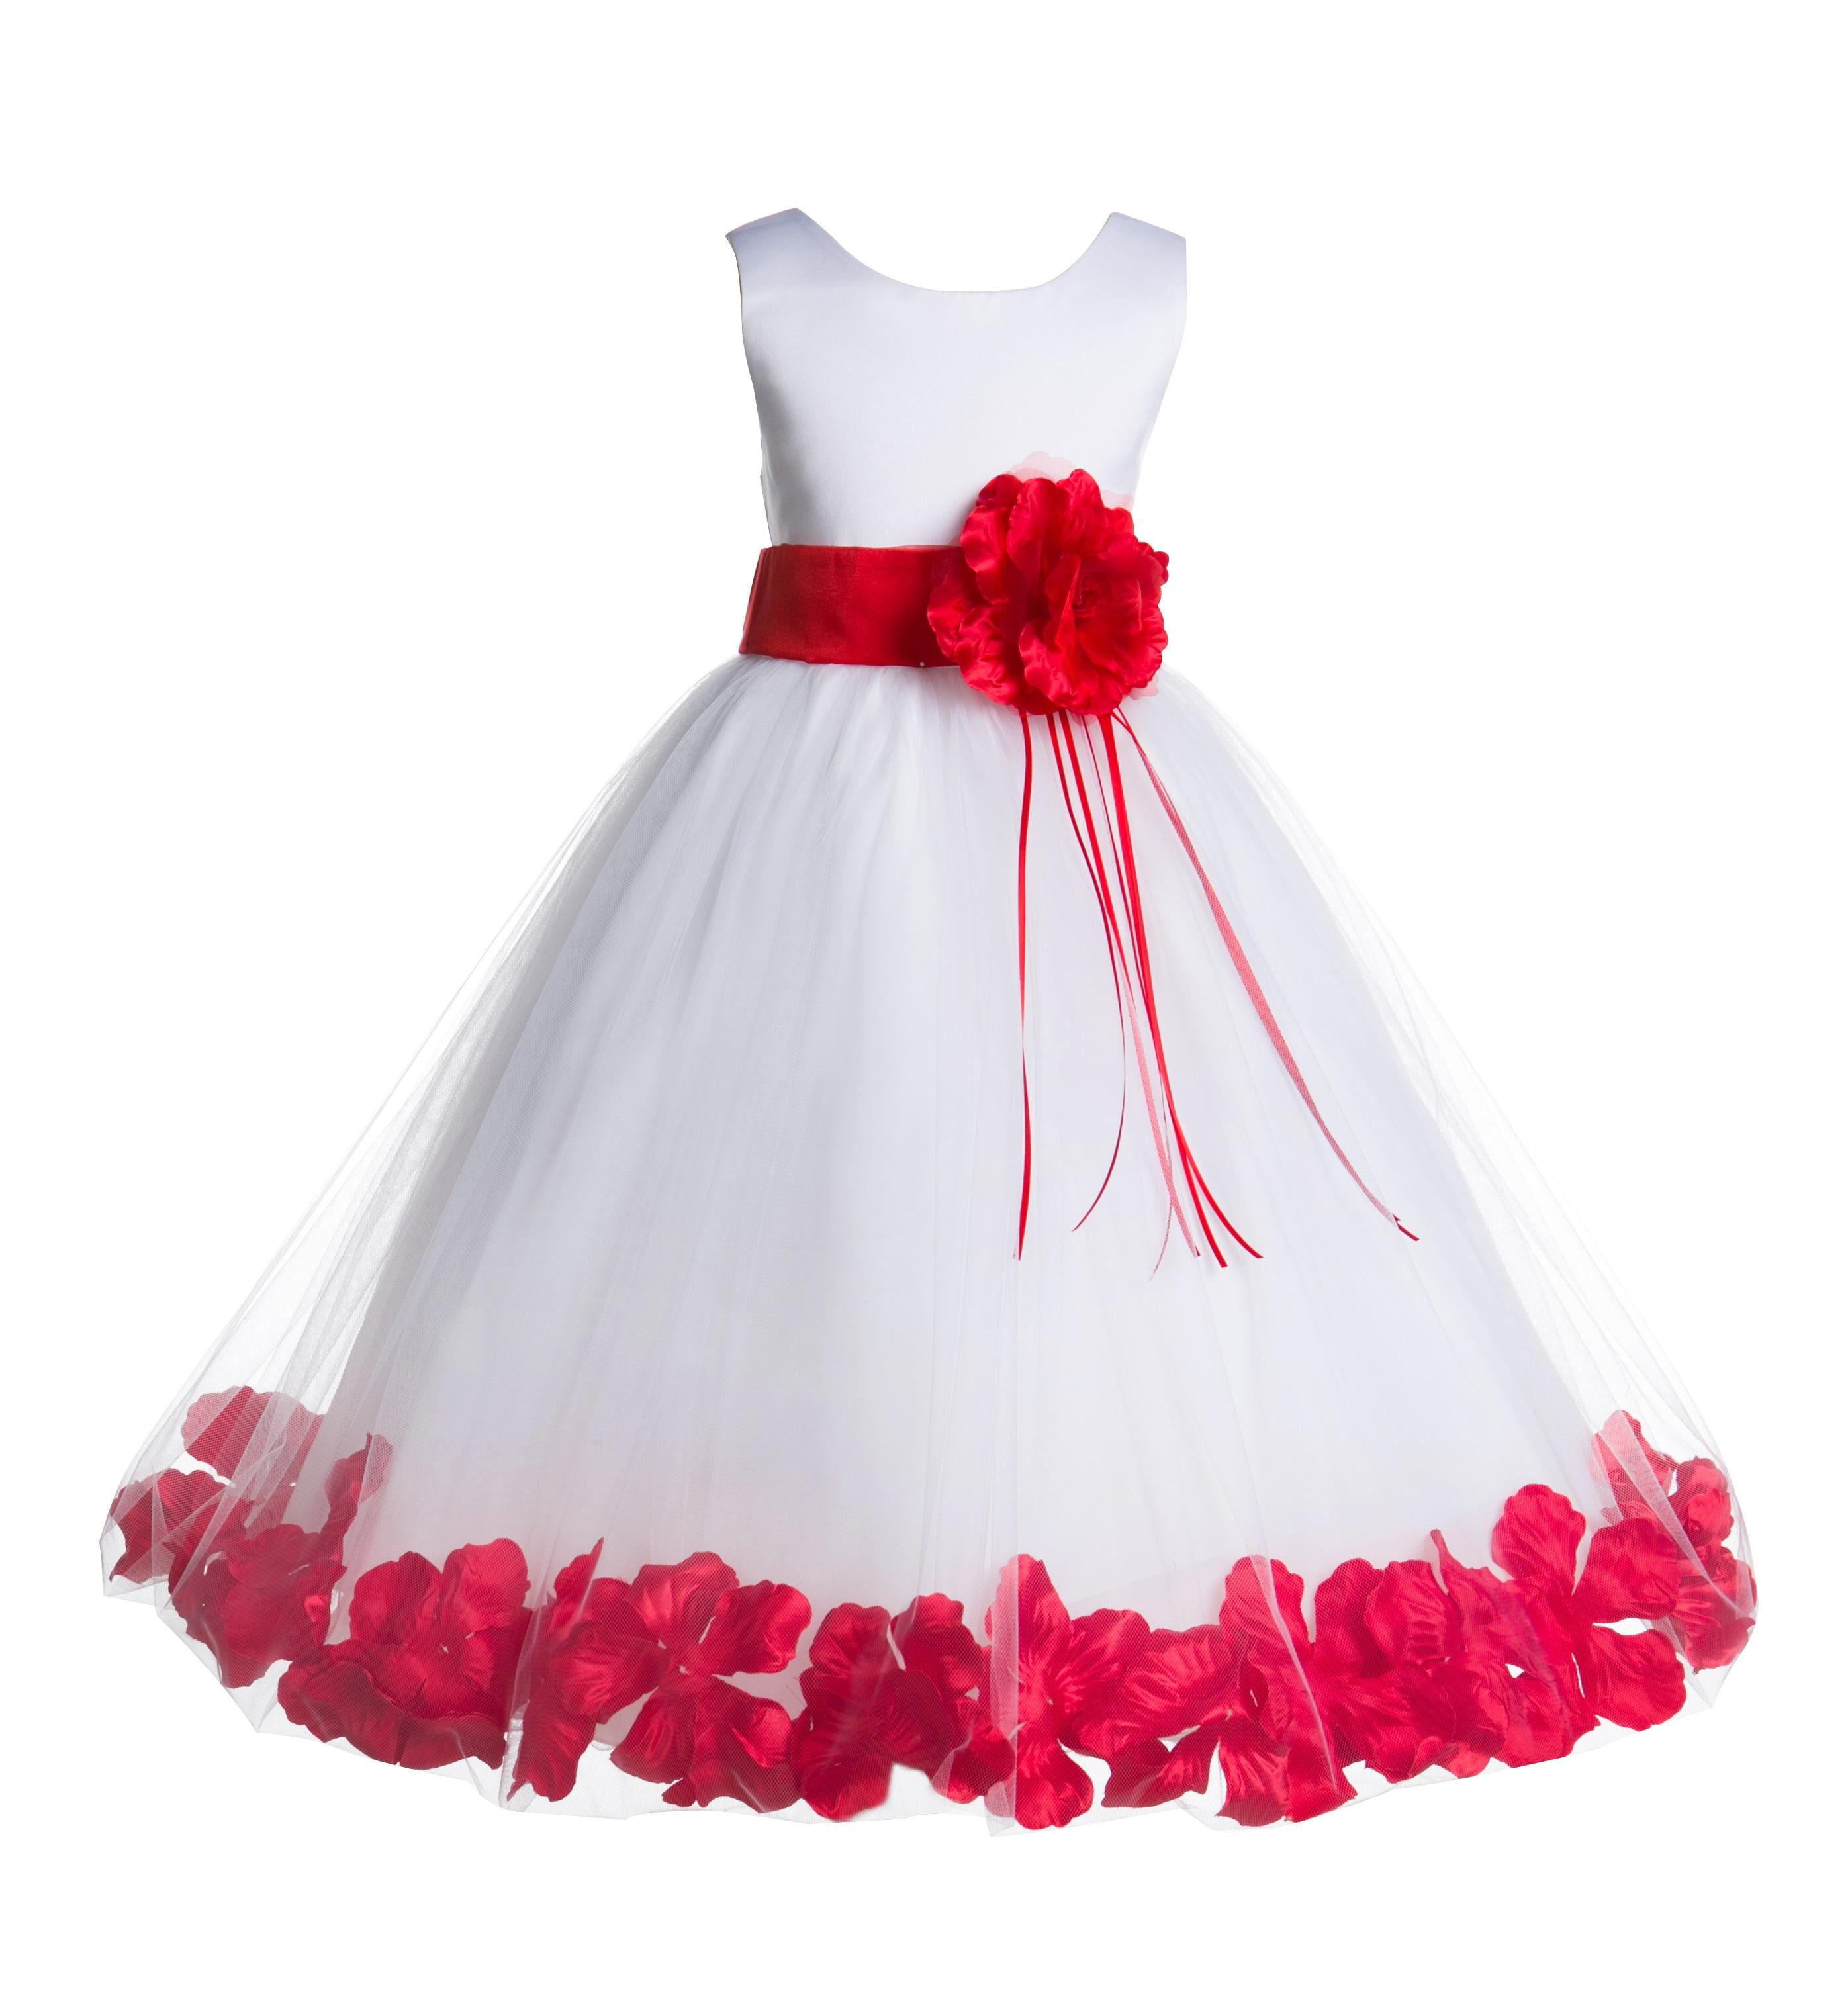 Baby Petals Tutu Flower Girl Dress Wedding Pageant Bridesmaid Formal Party Gown 